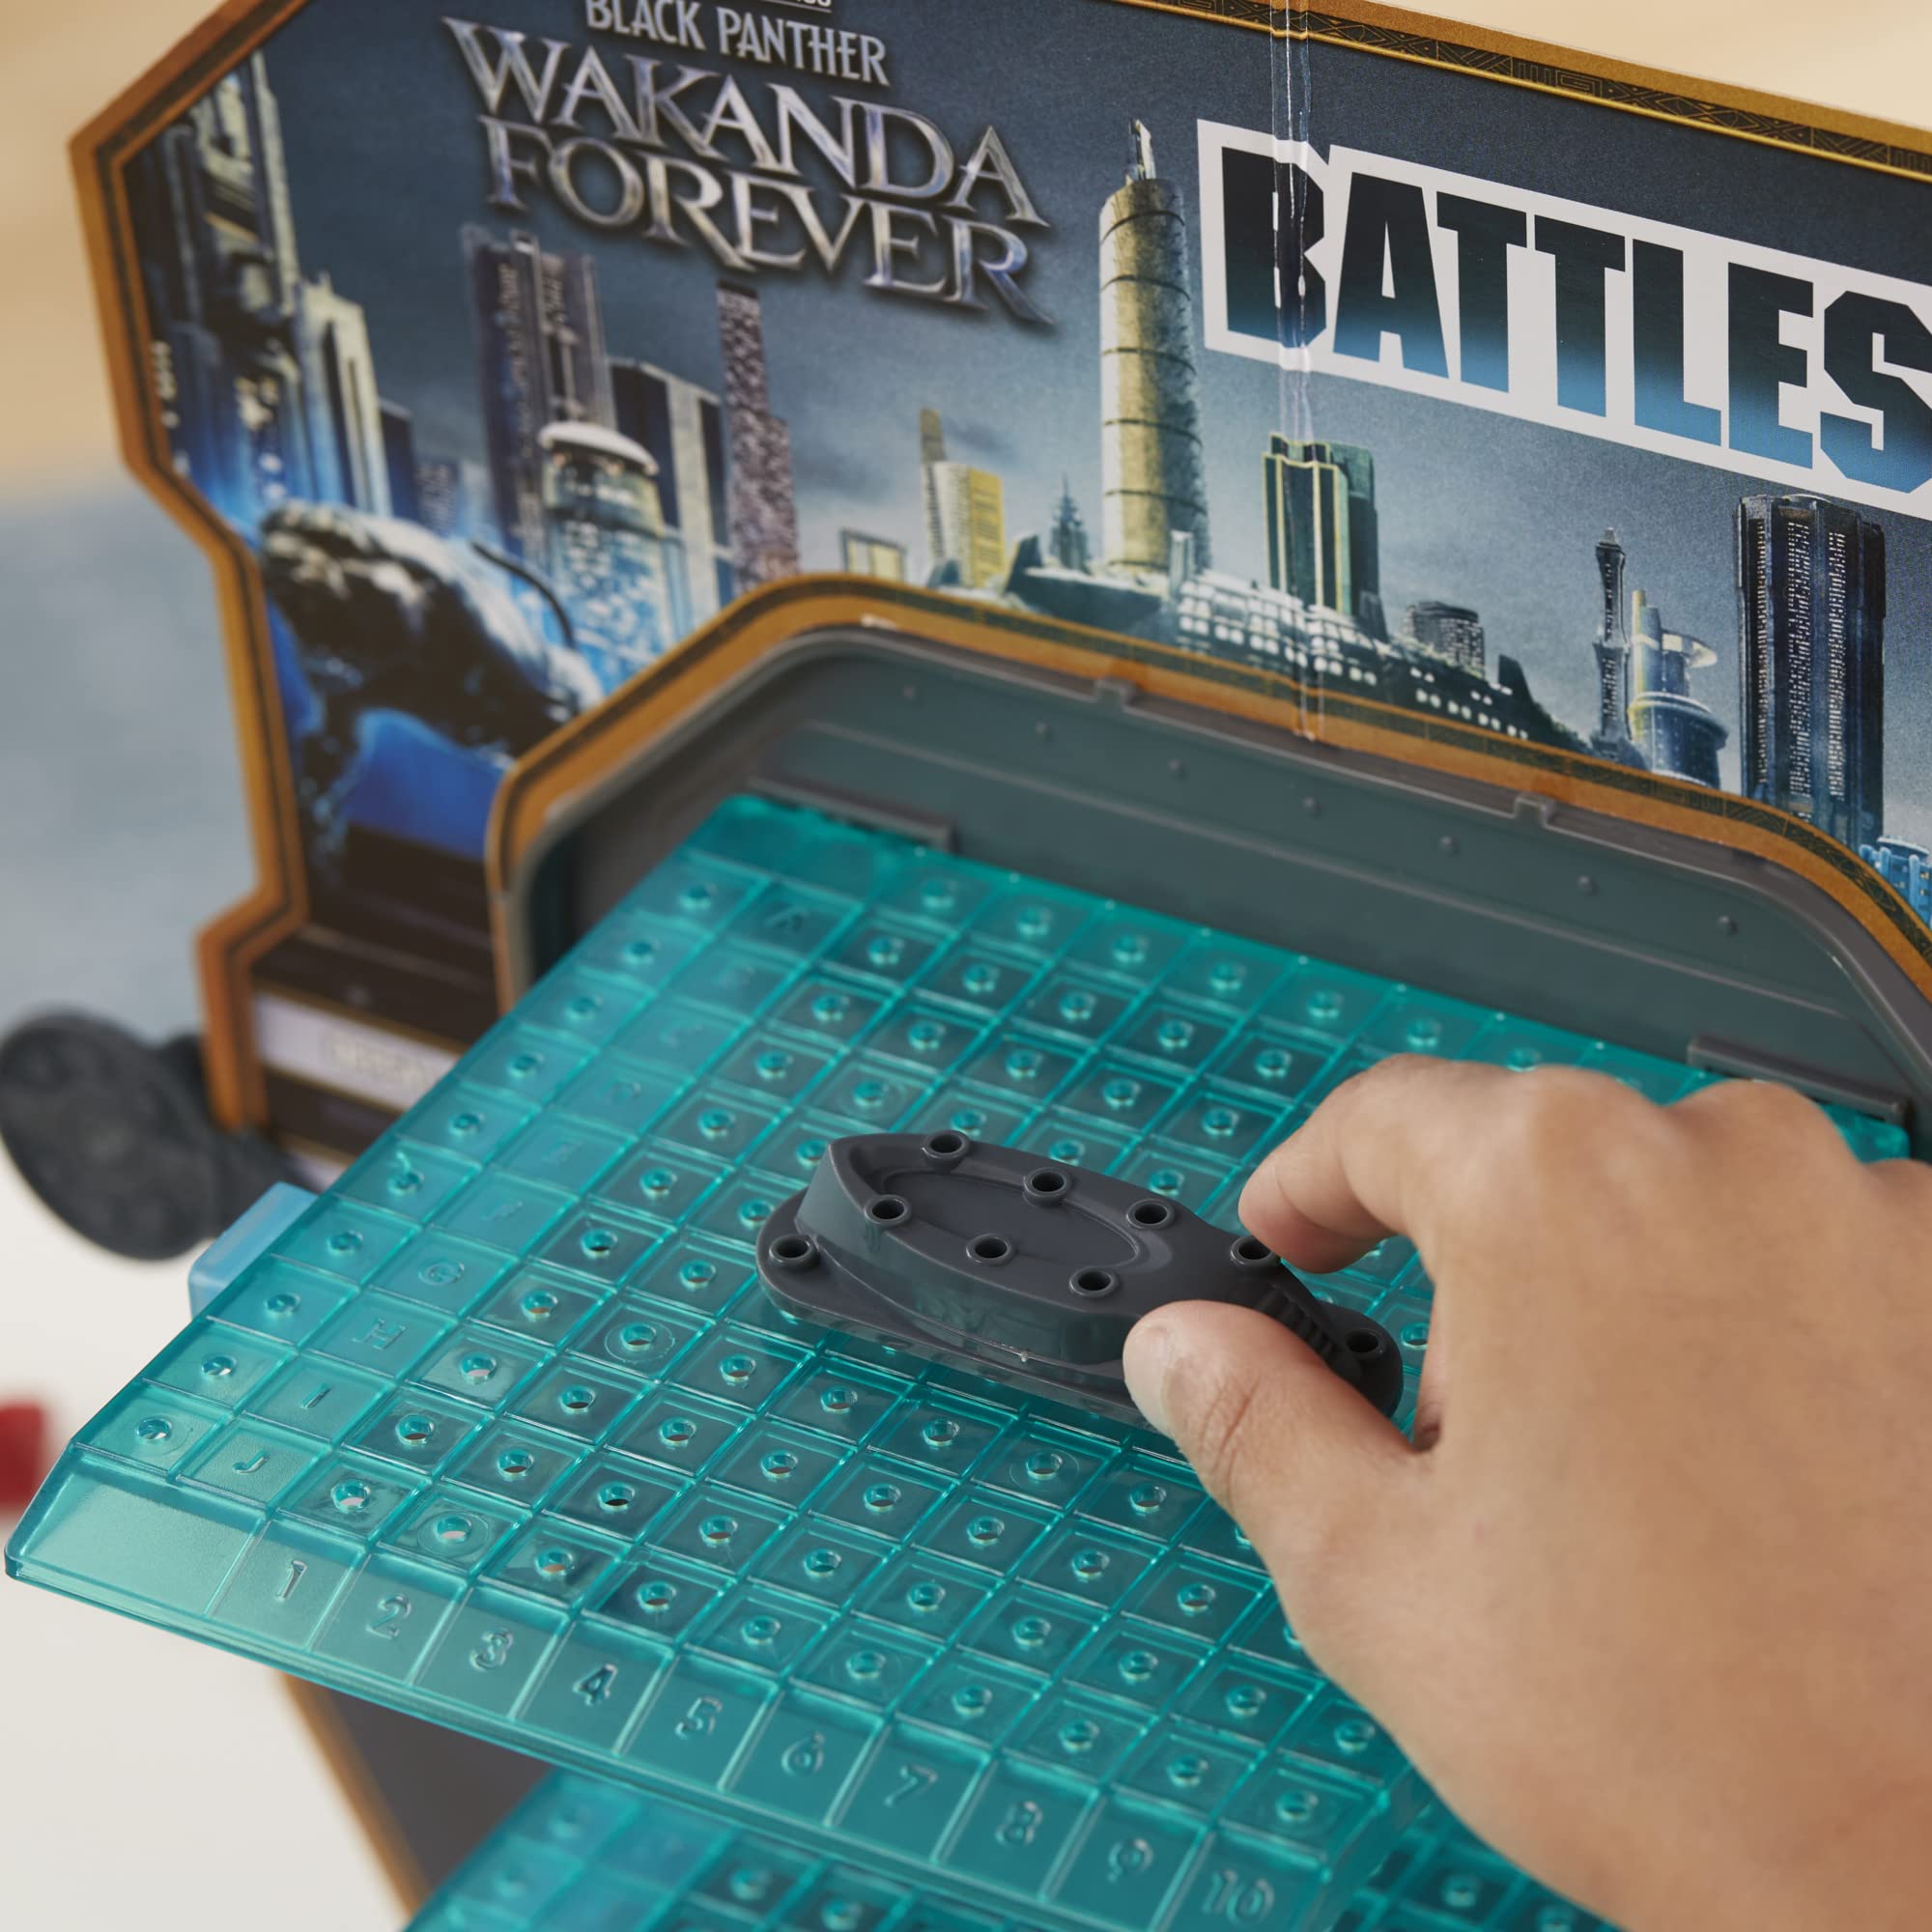 Hasbro Gaming Battleship: Marvel Studios' Black Panther Wakanda Forever Edition, 3D Strategy Game for Ages 7+, 2-Player Board Game